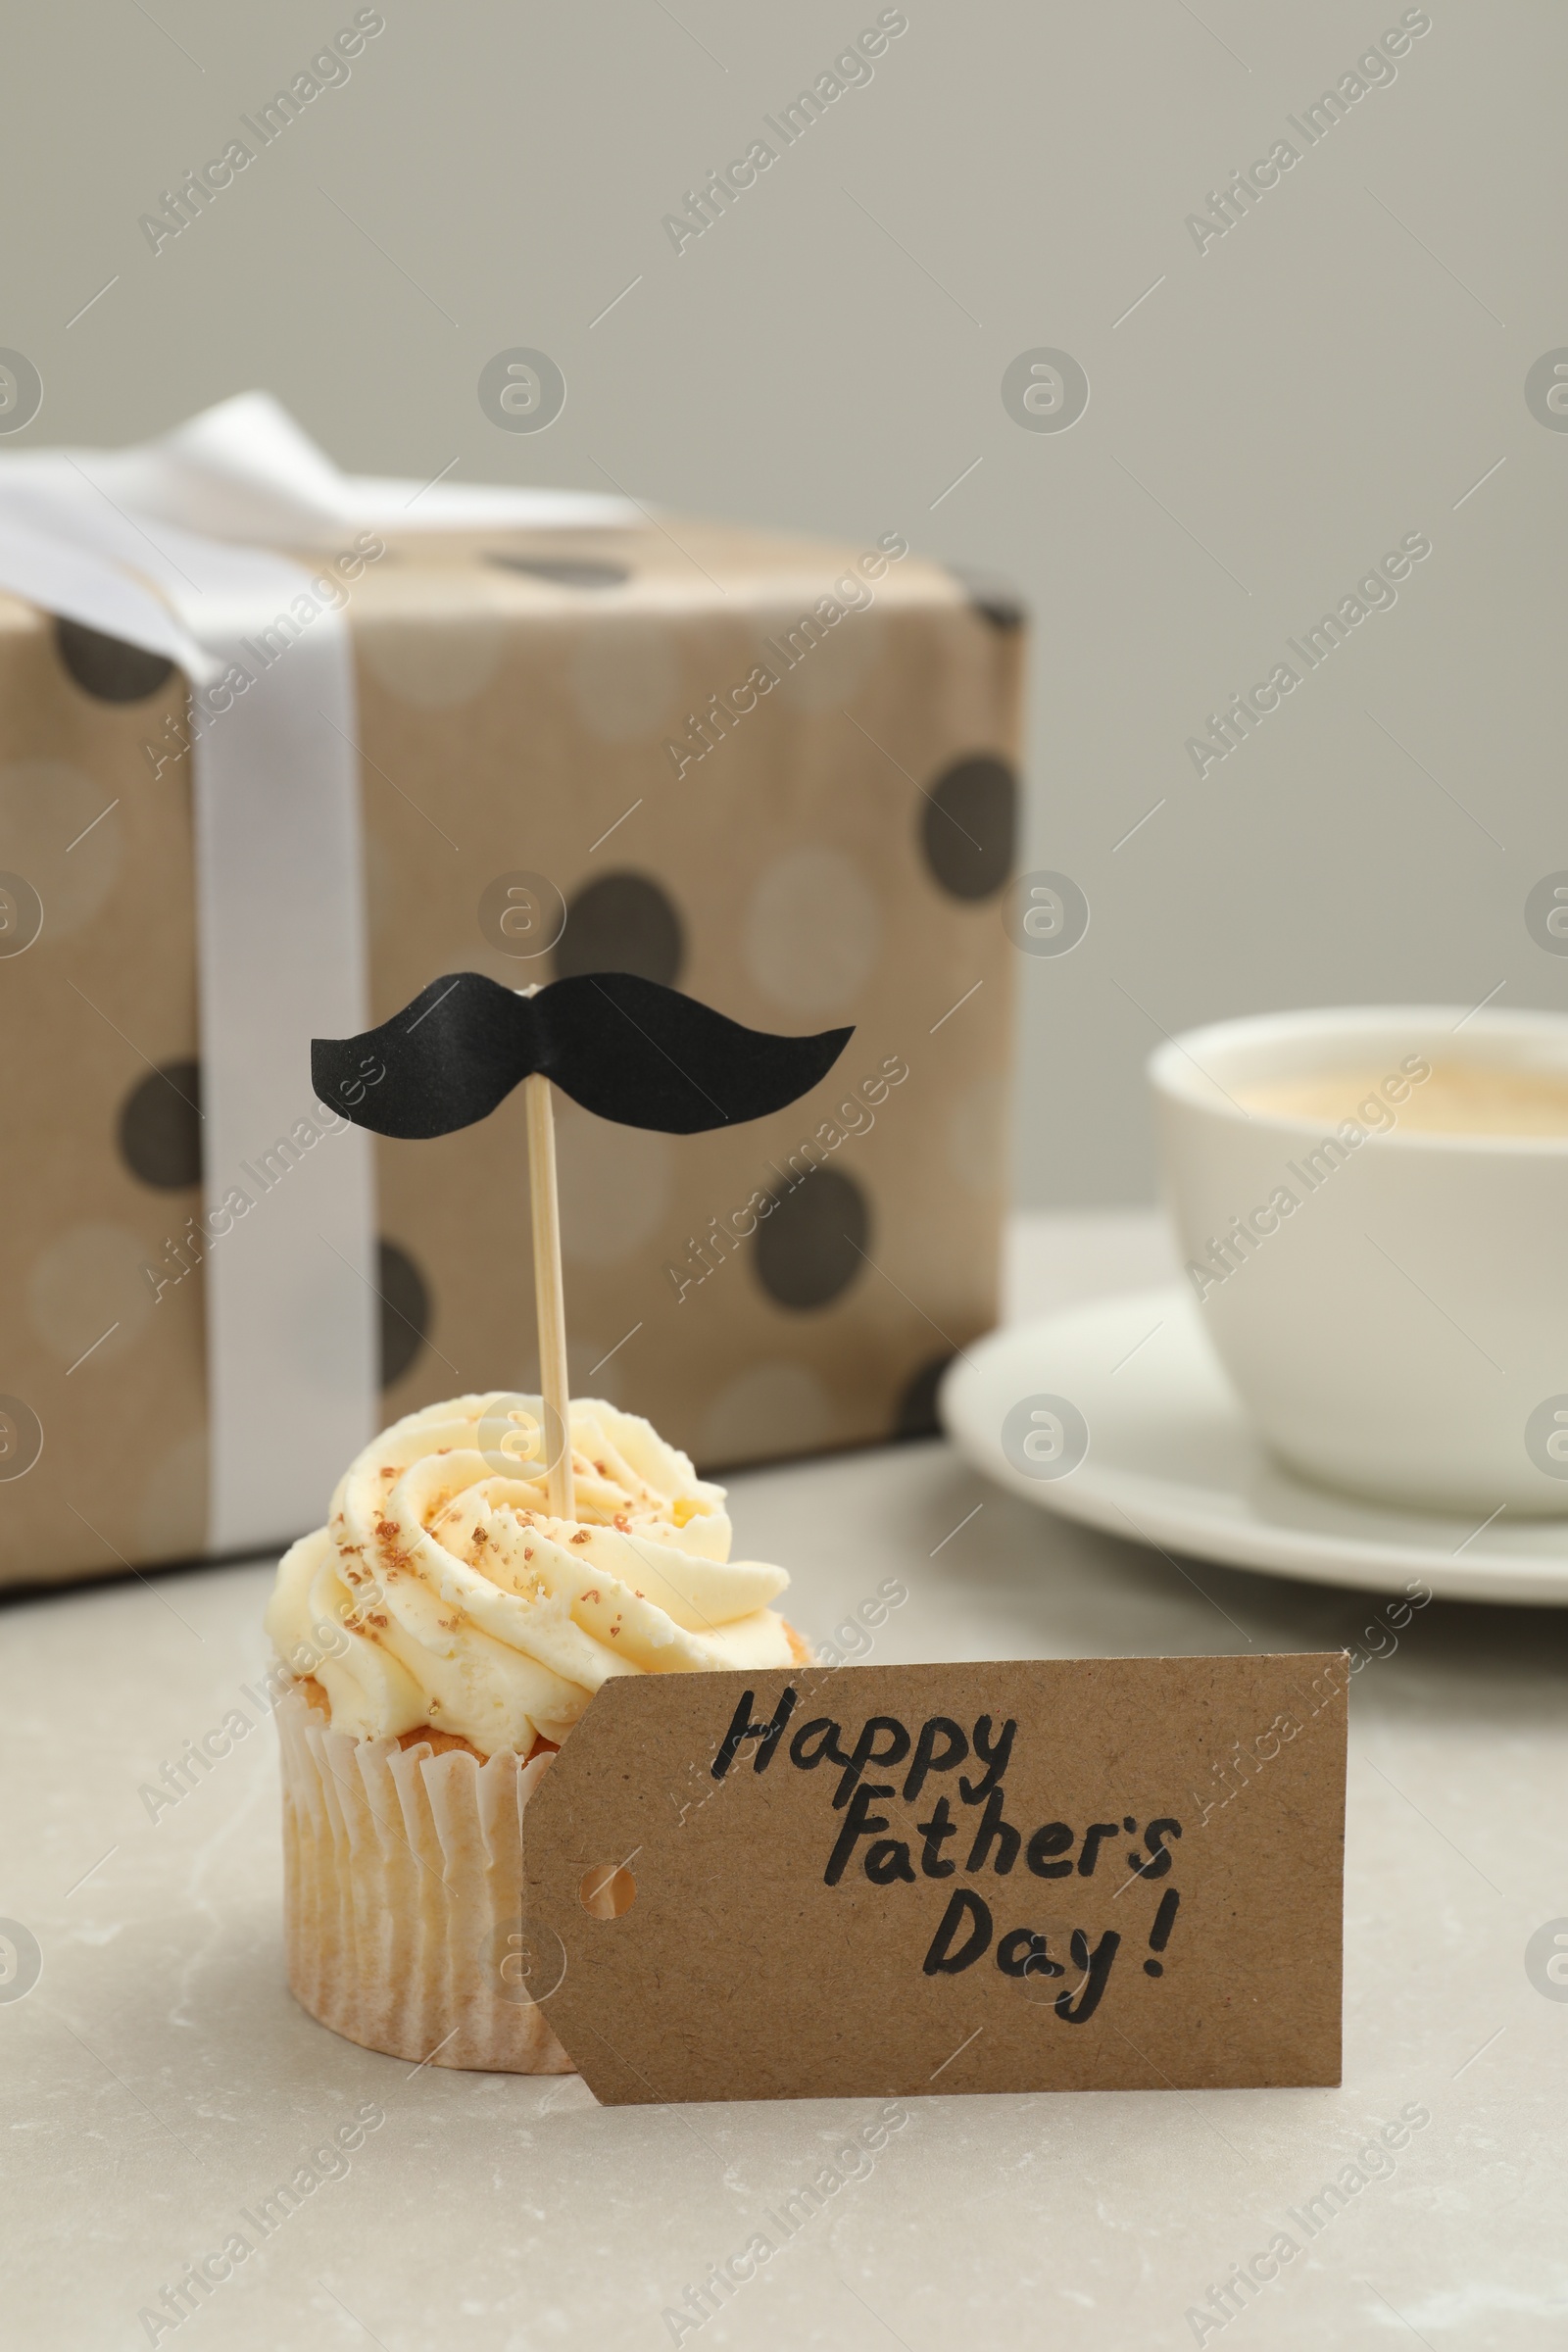 Photo of Card with phrase Happy Father's Day and delicious cupcake with mustache topper on light table